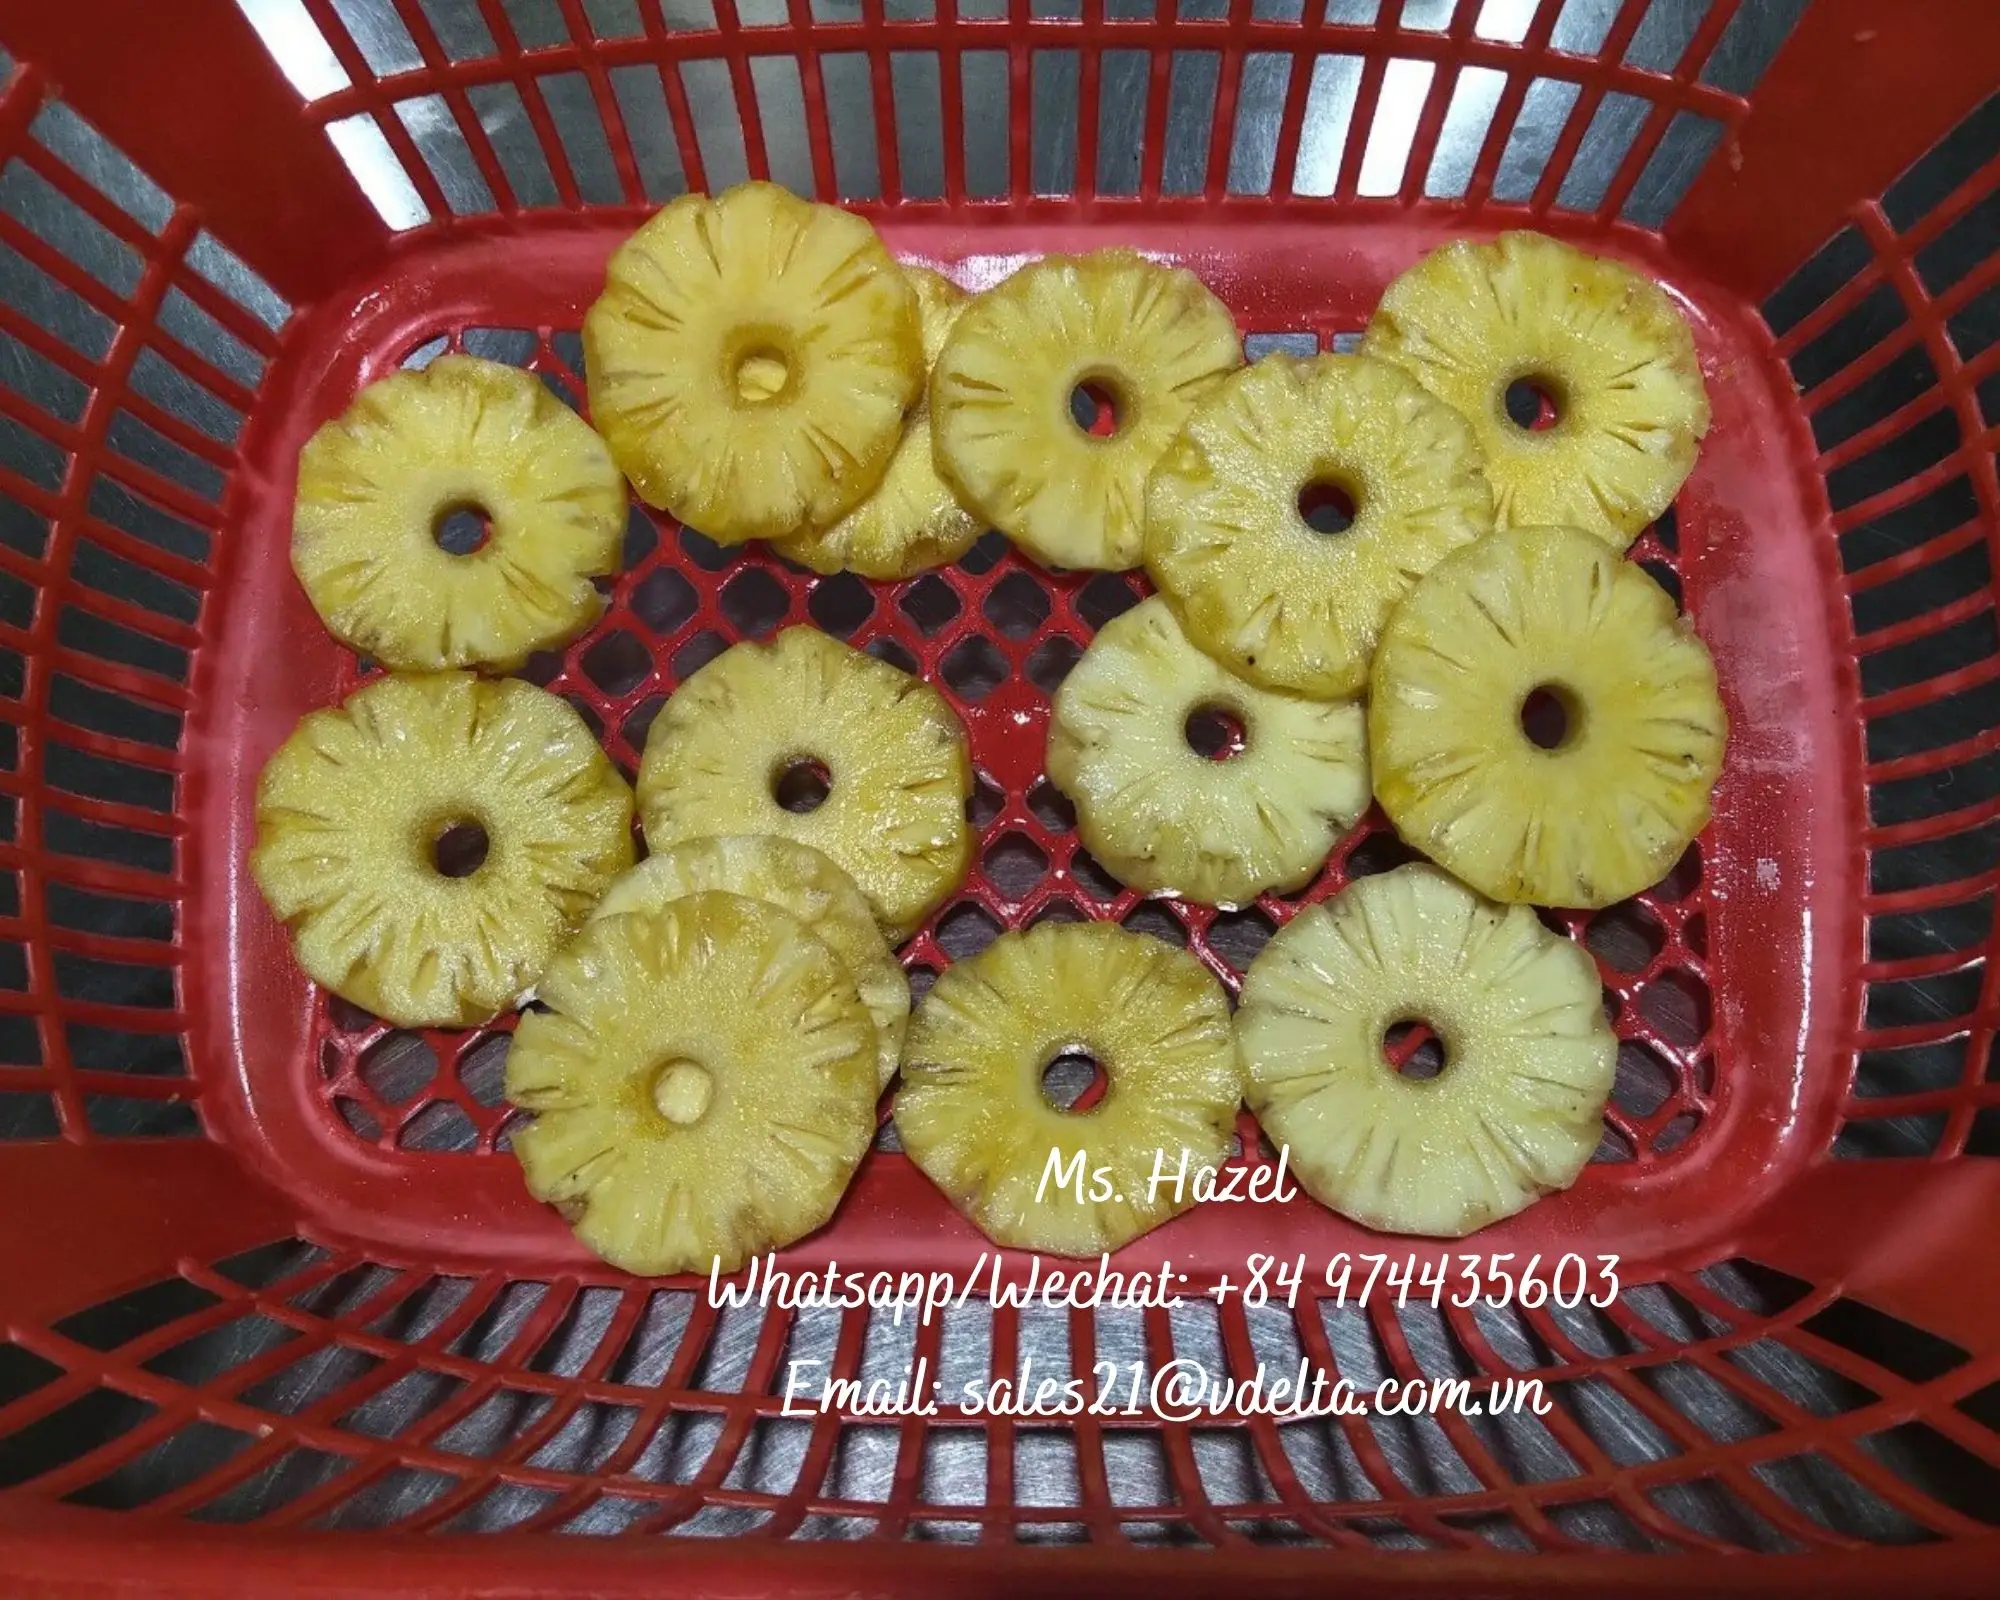 Supplier Canned Pineapple With Normal Lids From Vietnam/Ms. Hazel (+84) 974435603